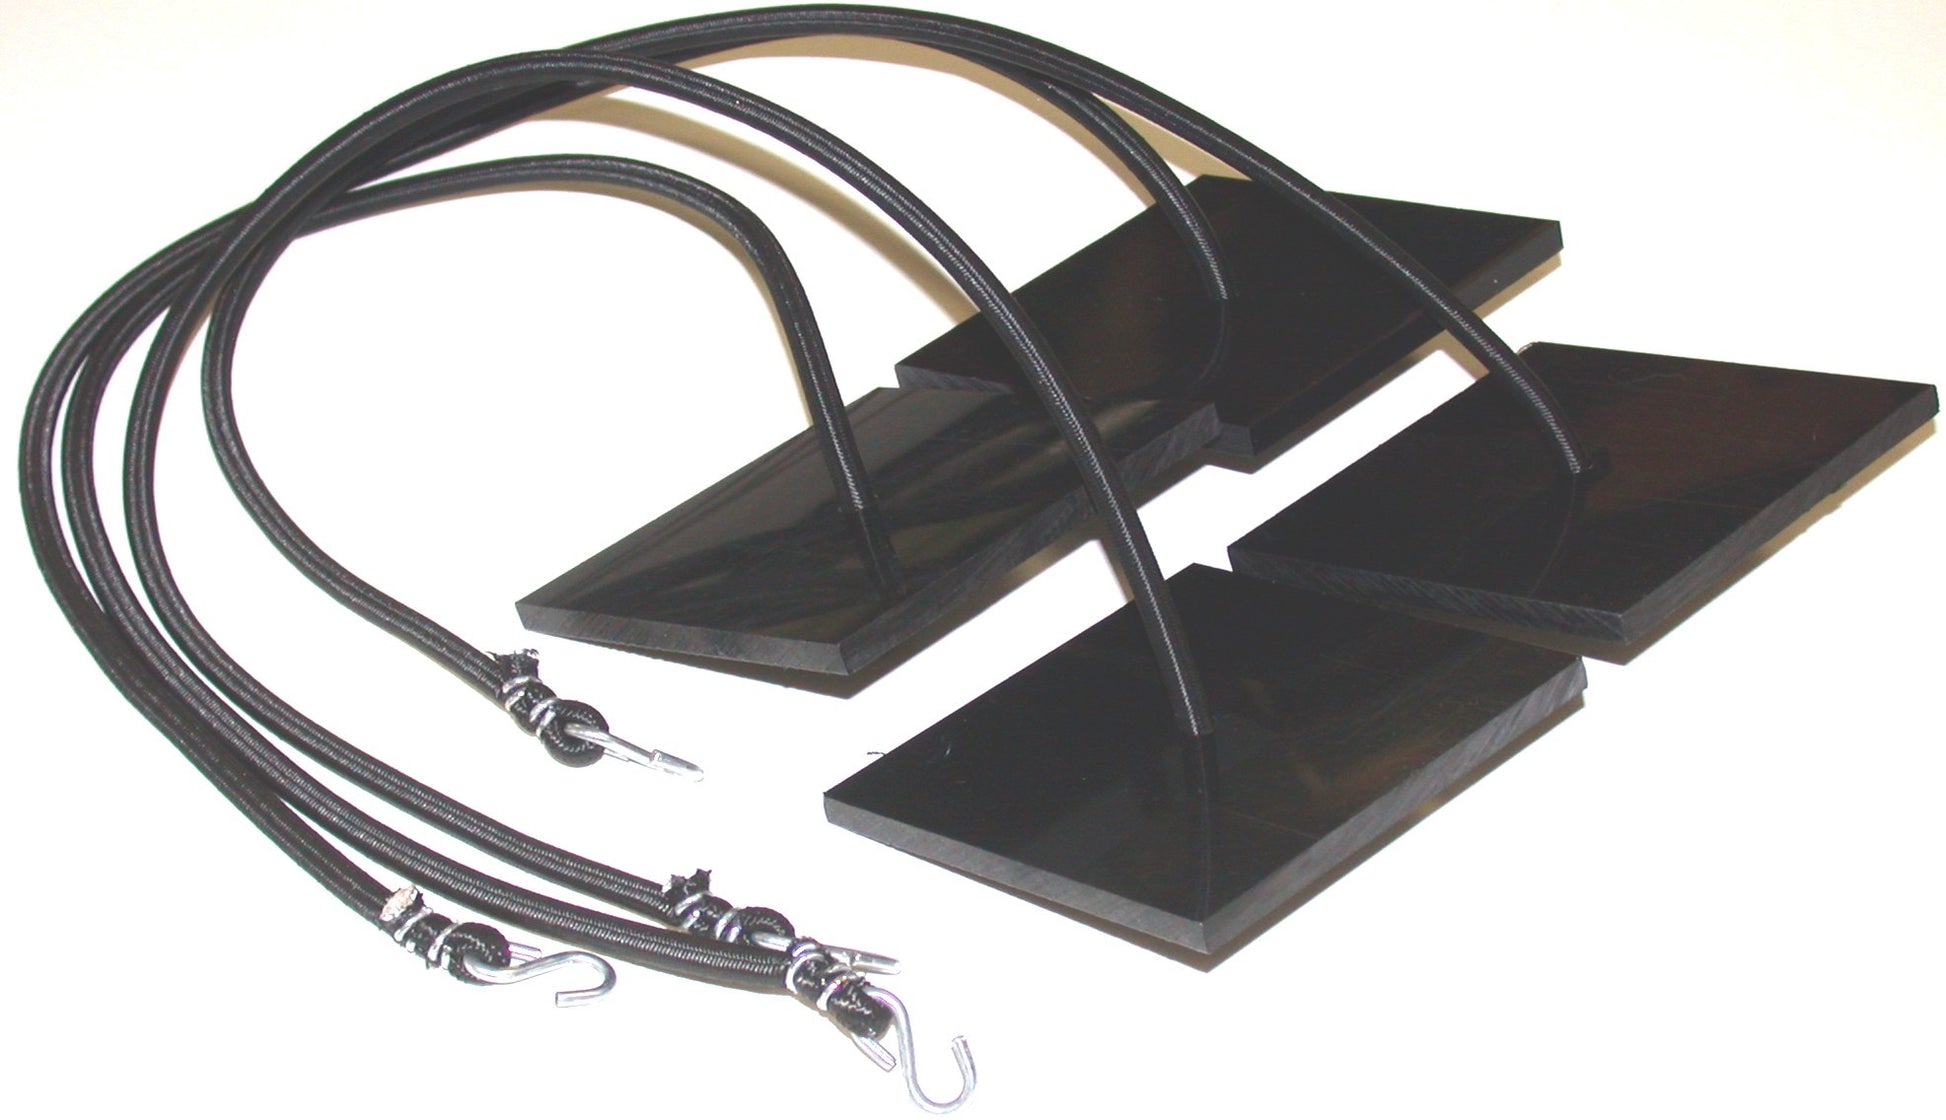 four sand anchor plate set with bungee cord attached